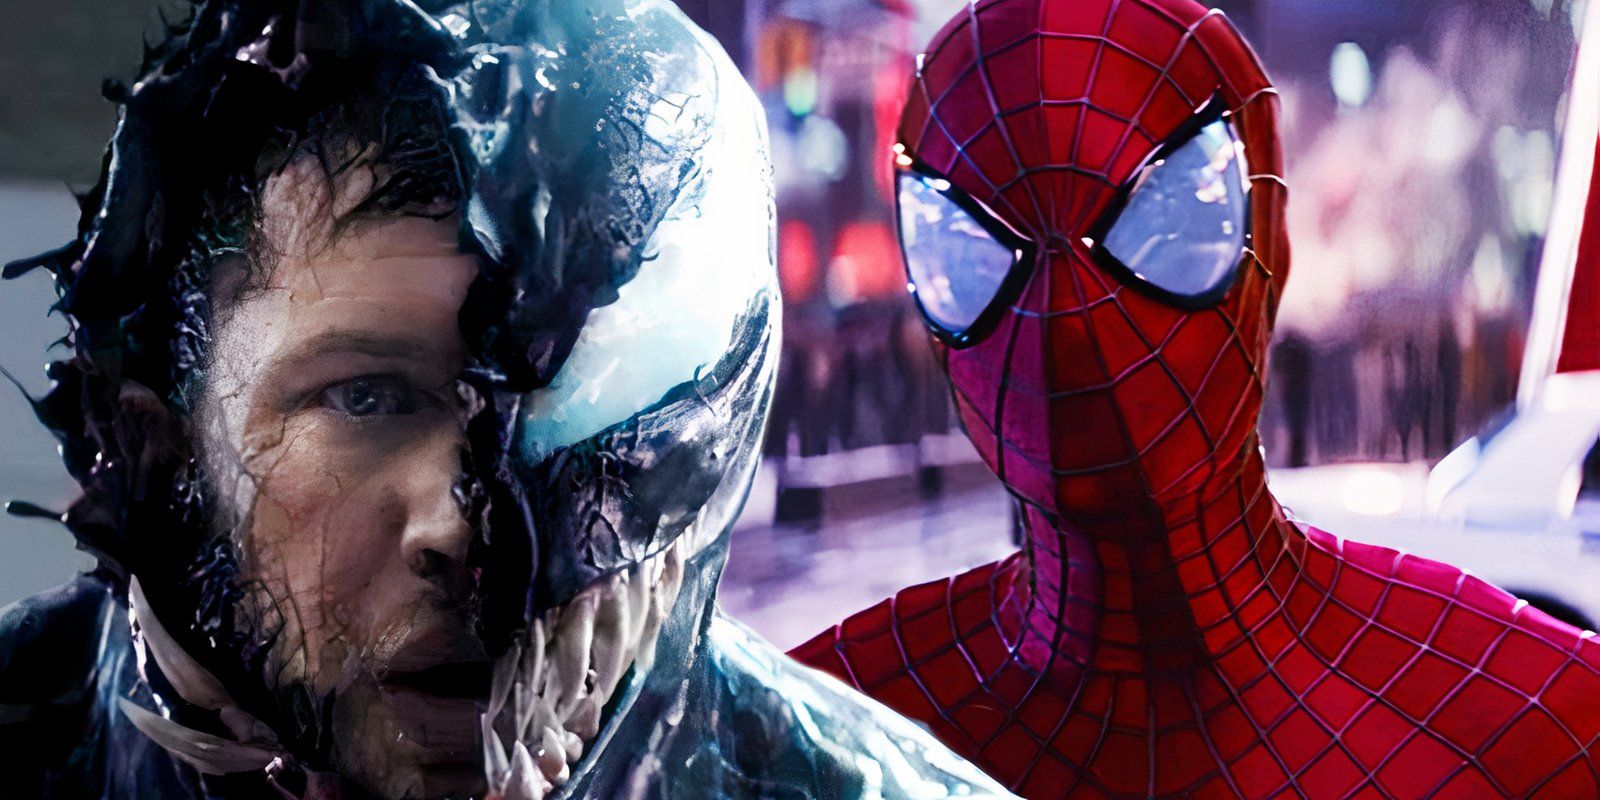 According to Marvel Movie Theory, Spider-Man’s live-action debut at Sony comes 6 years after his first launch